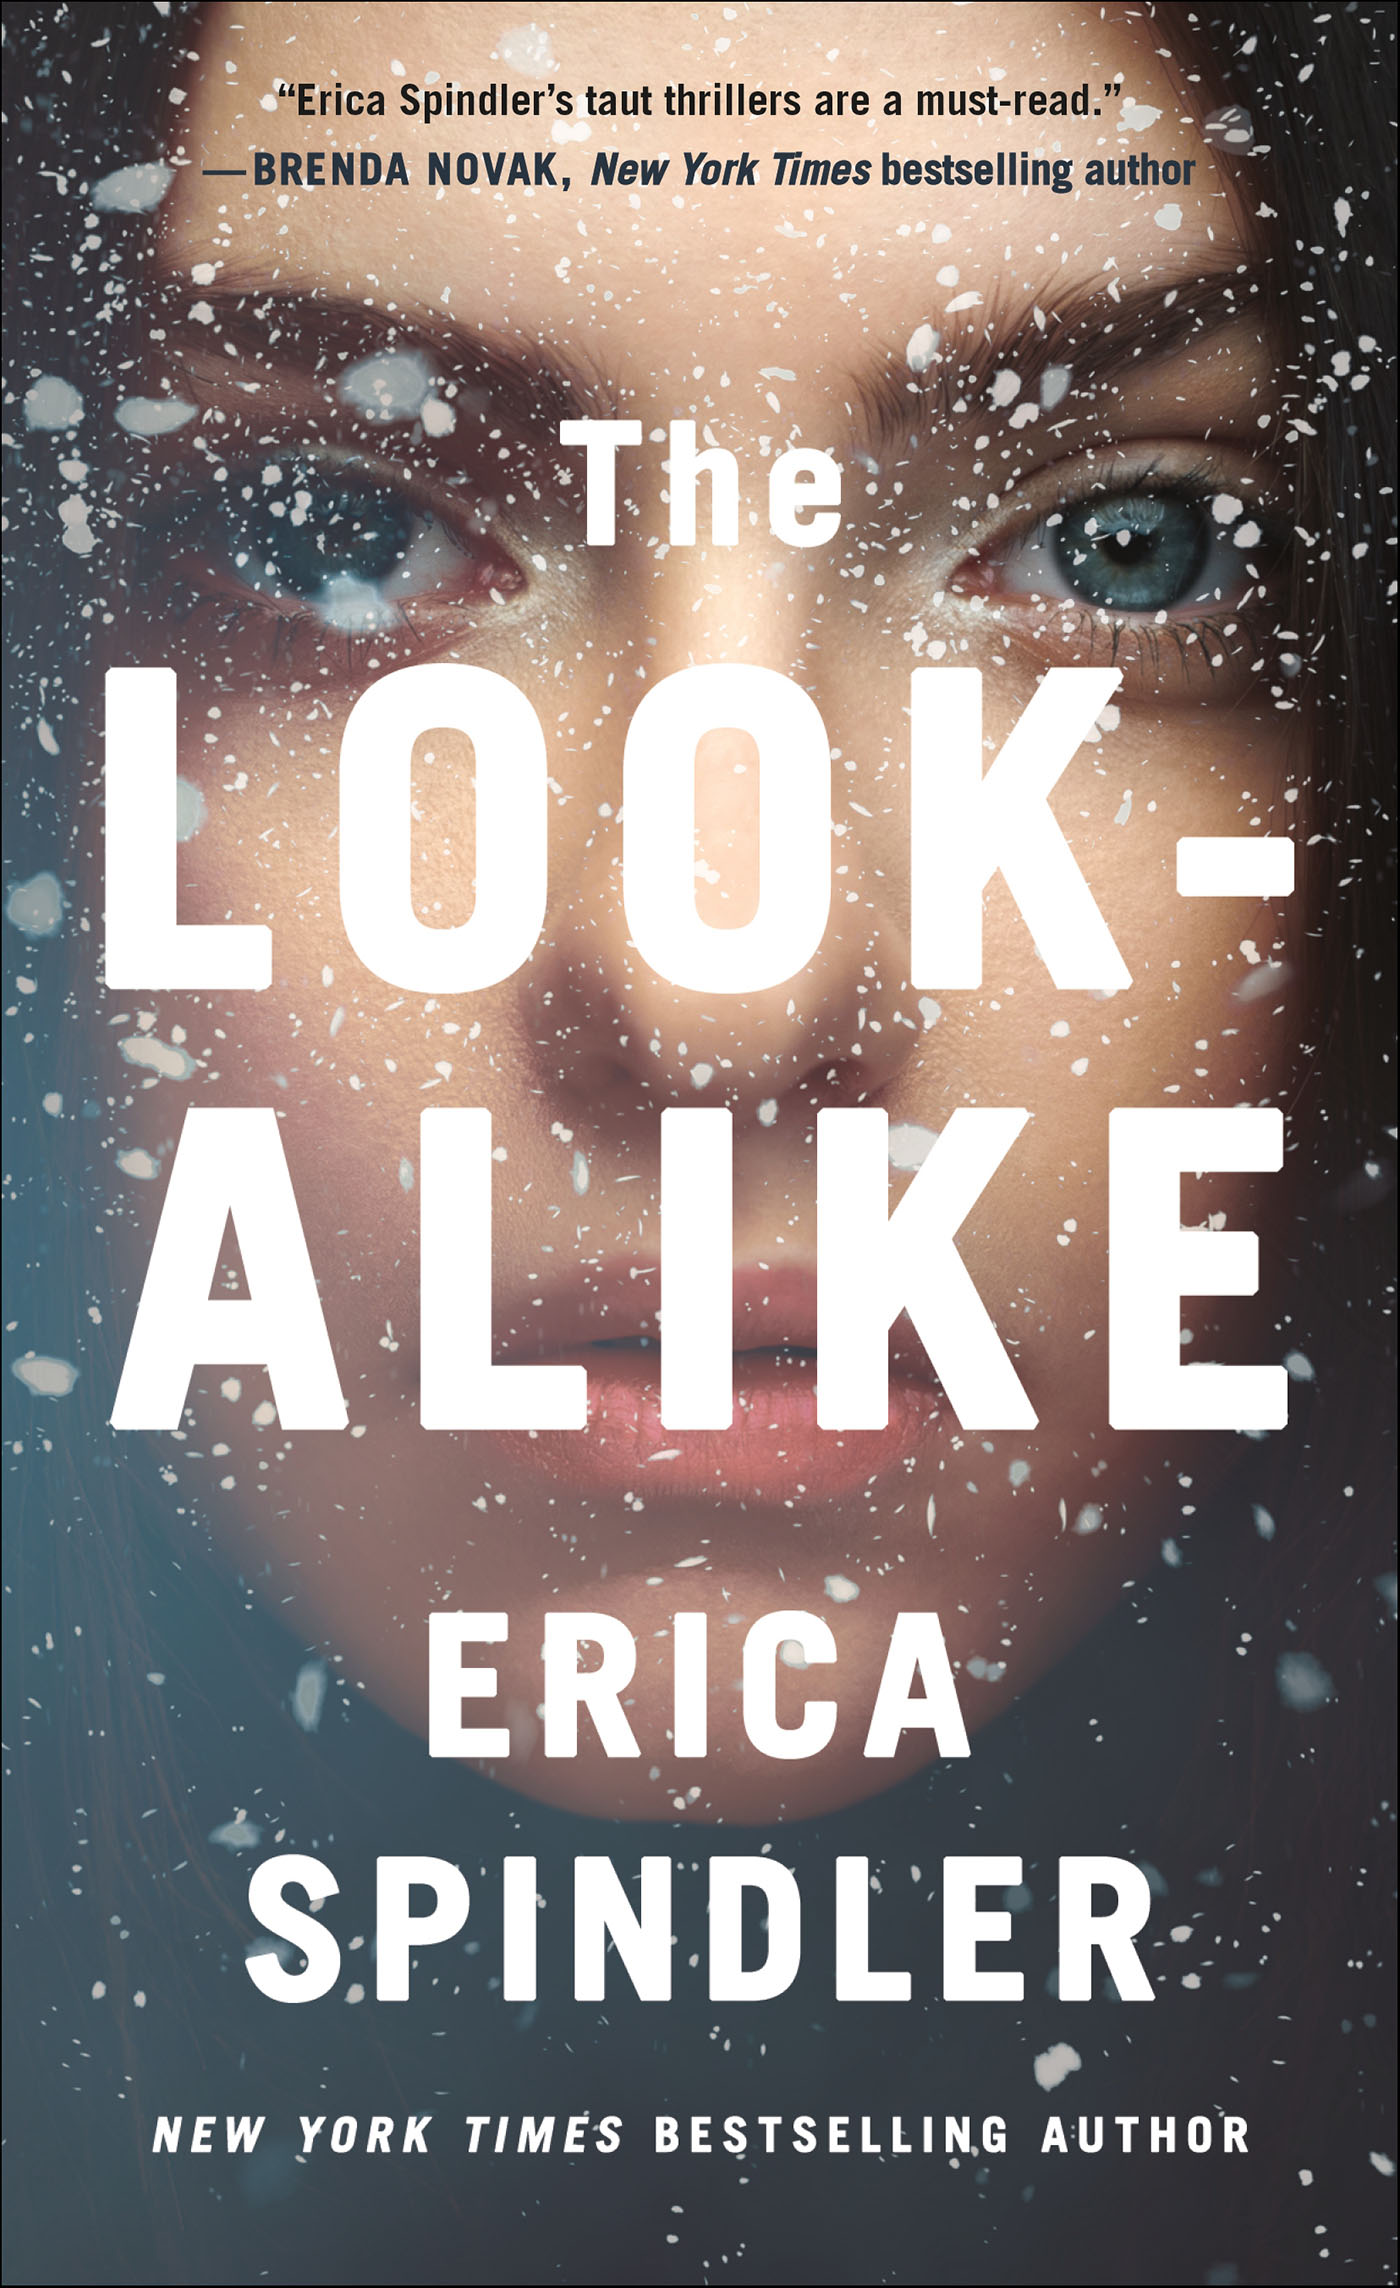 The look-alike cover image